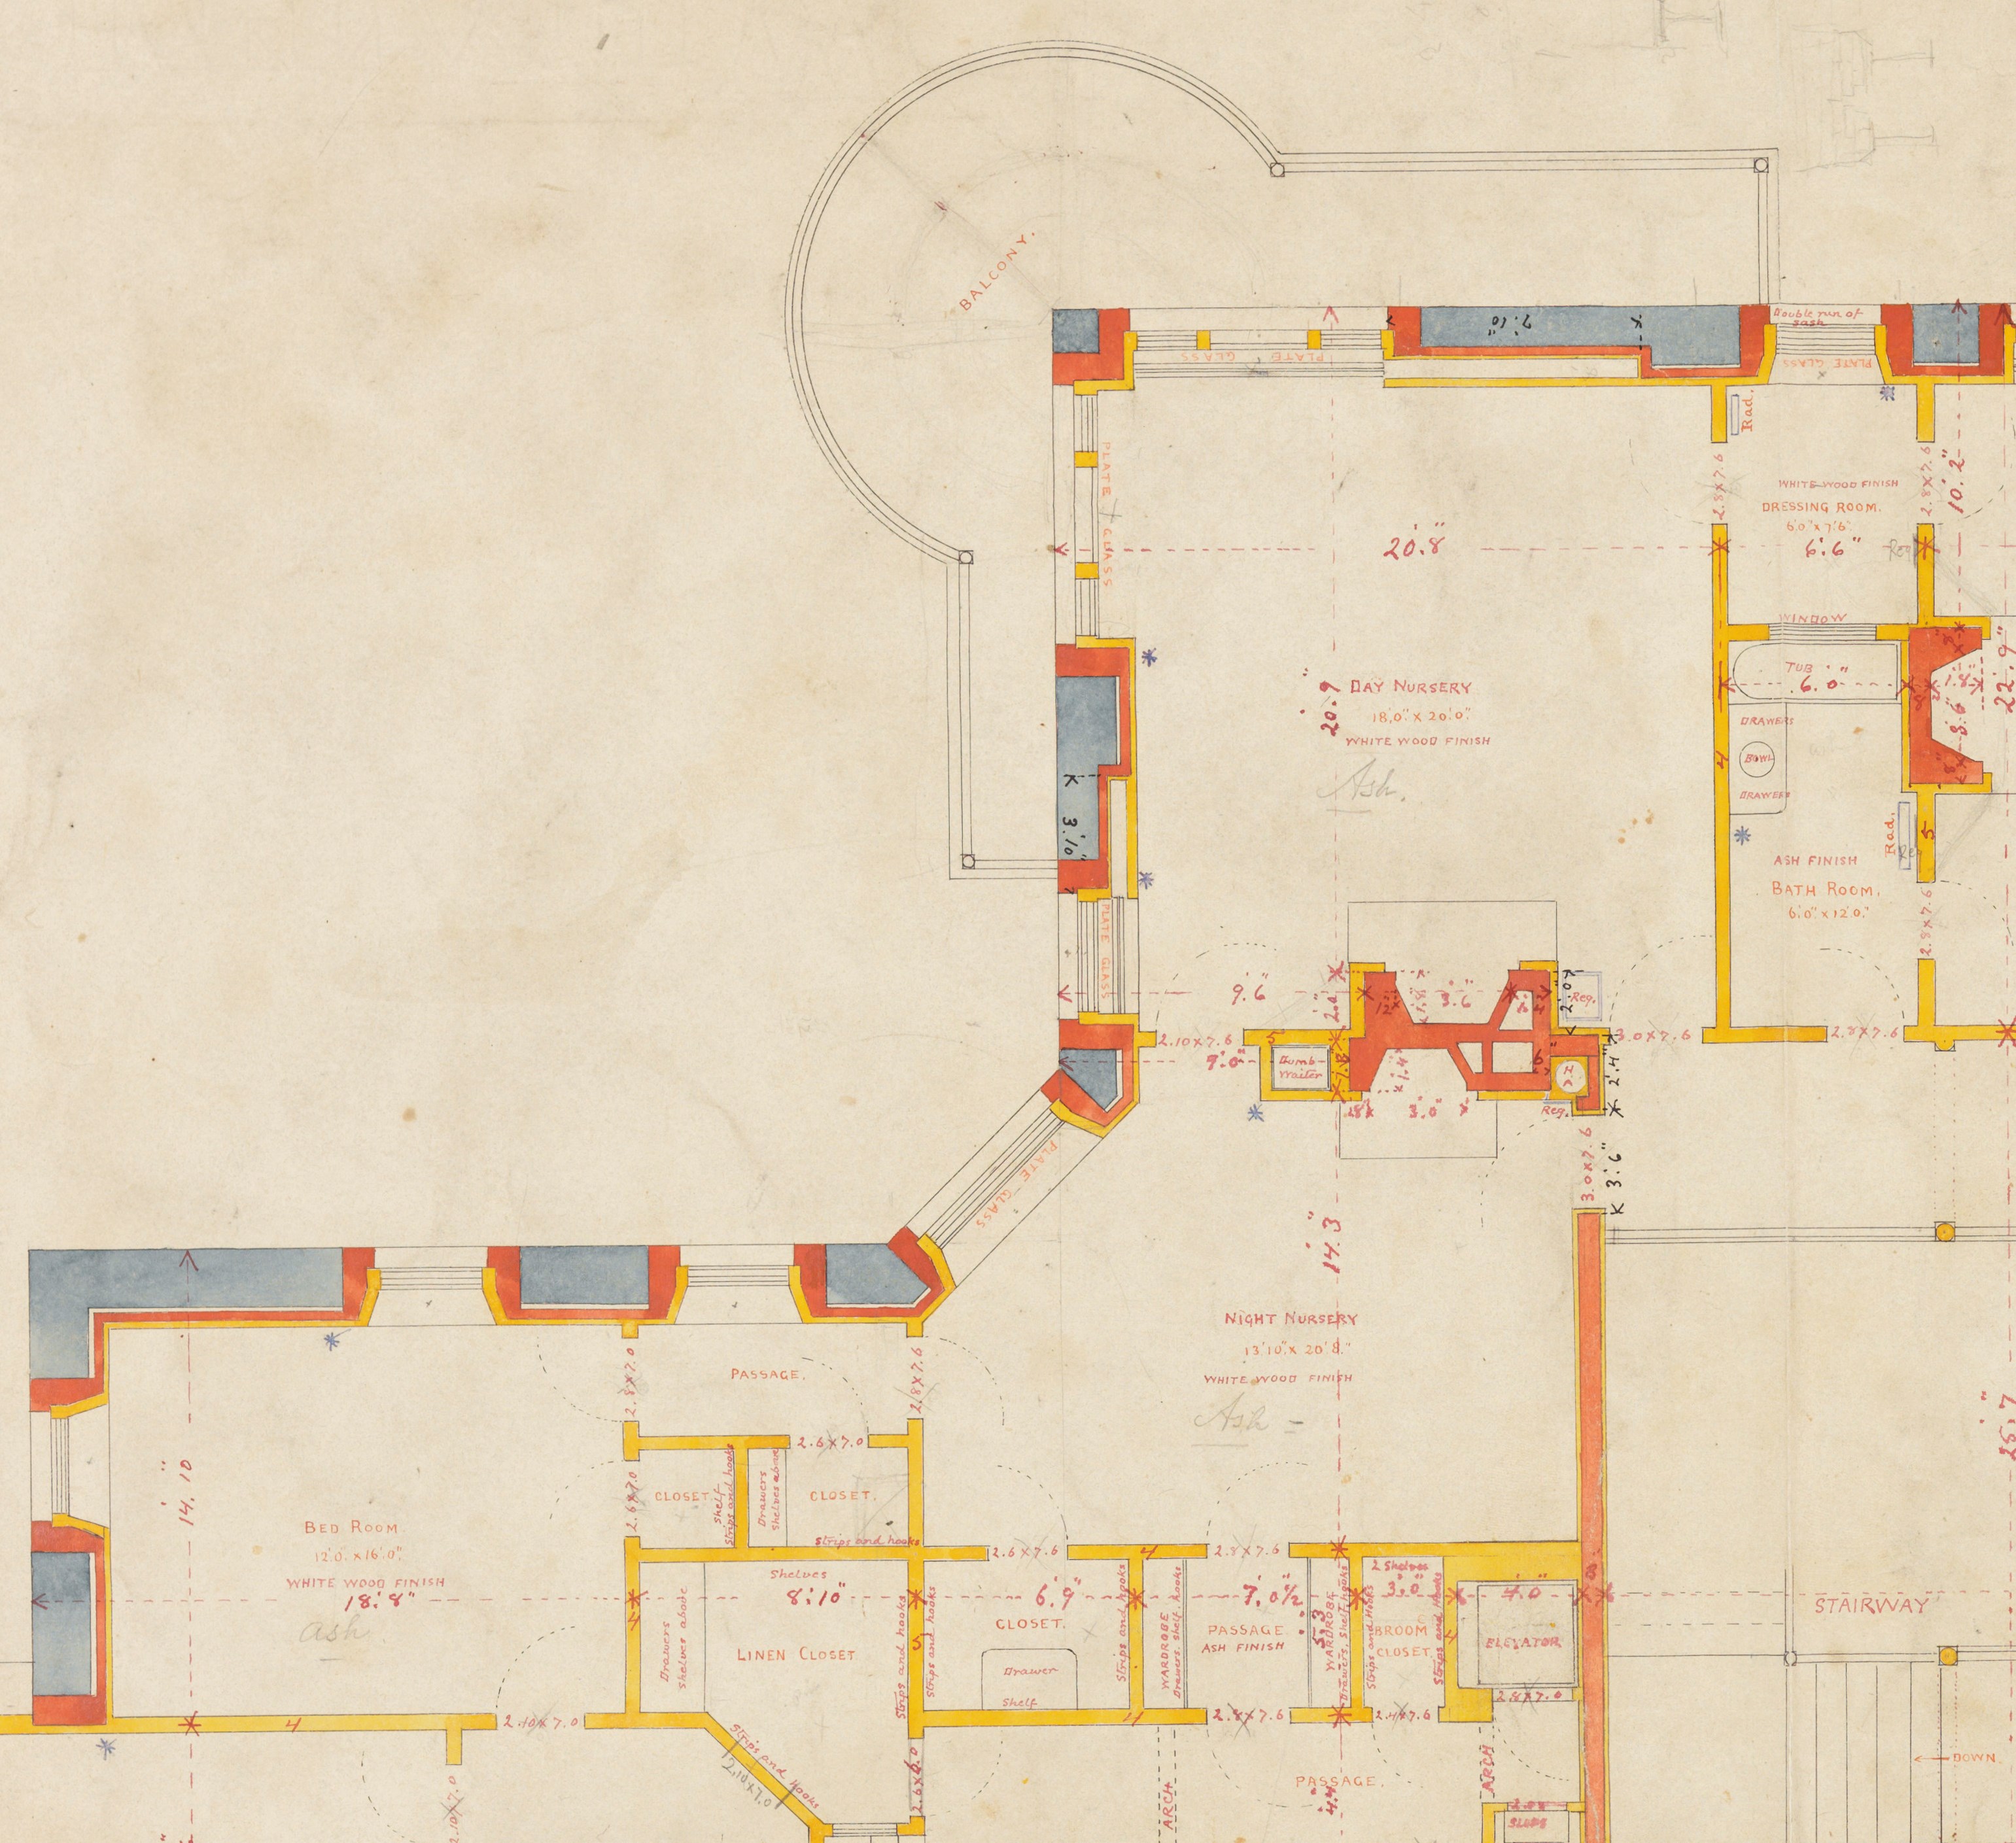 Detail of the builder's plans showing drawing of layout of rooms on the second floor including the nurseries and staff rooms.